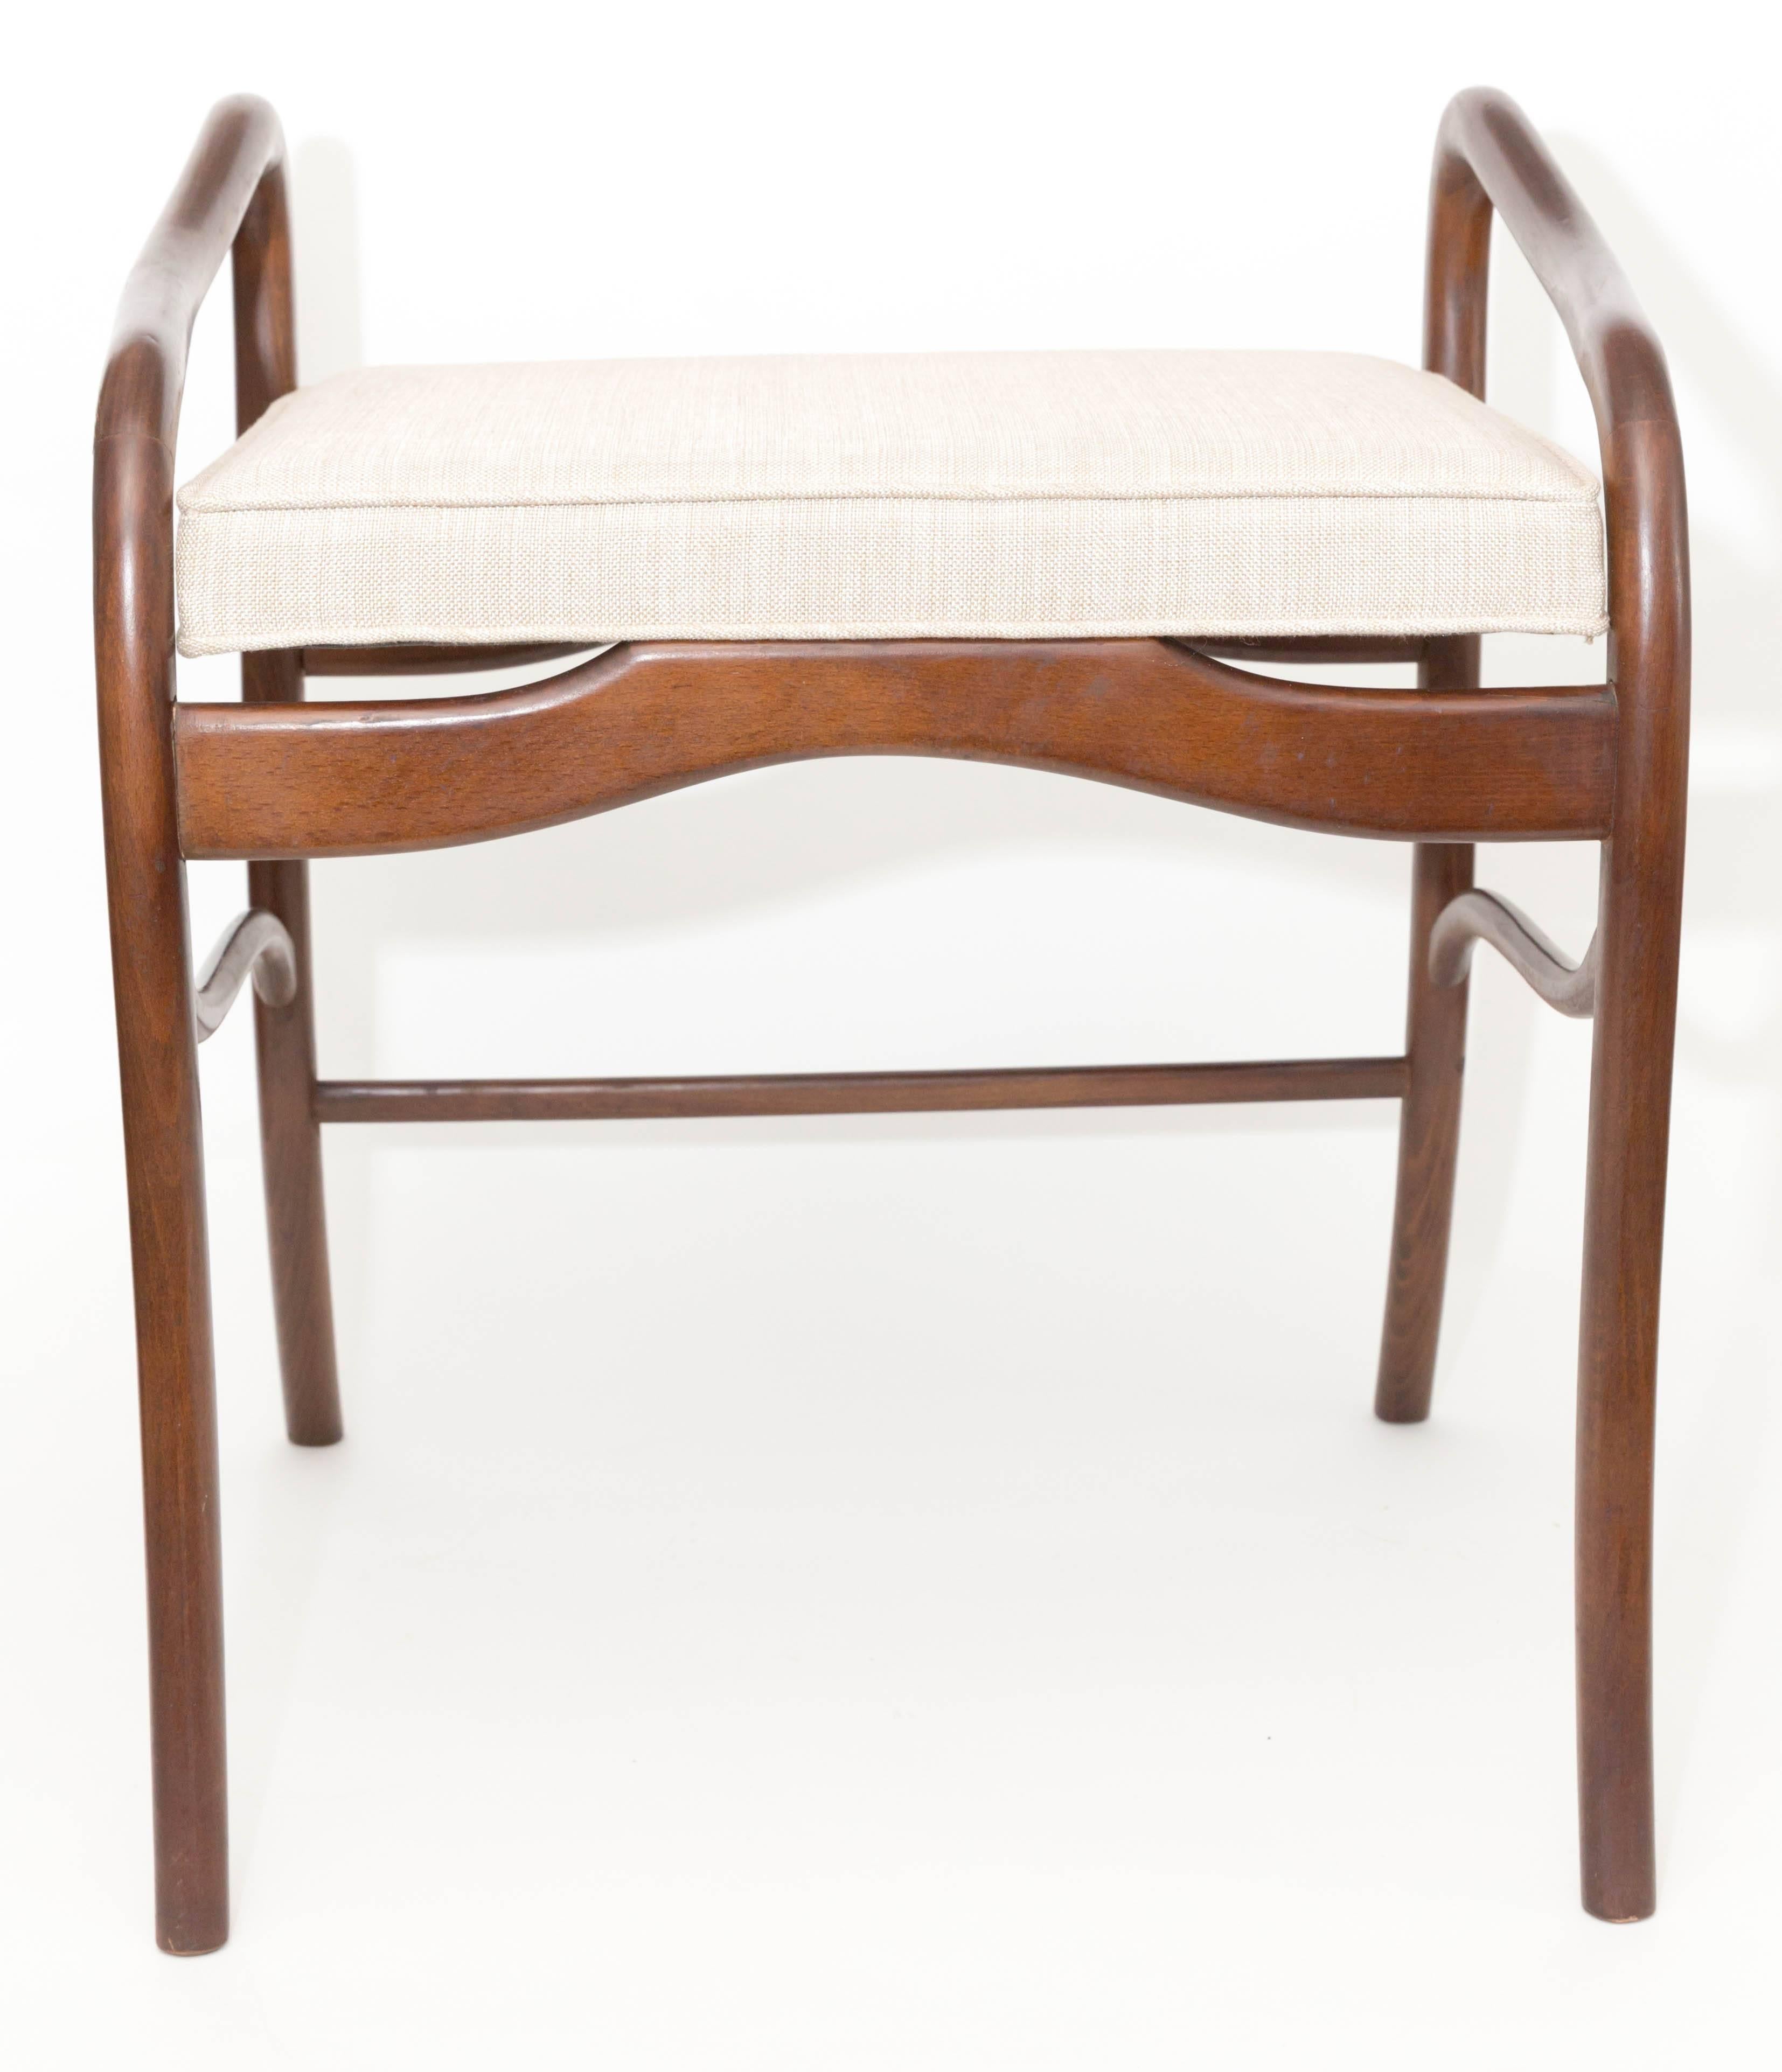 Curvilinear Wood Benches with Upholstered Seats For Sale 2